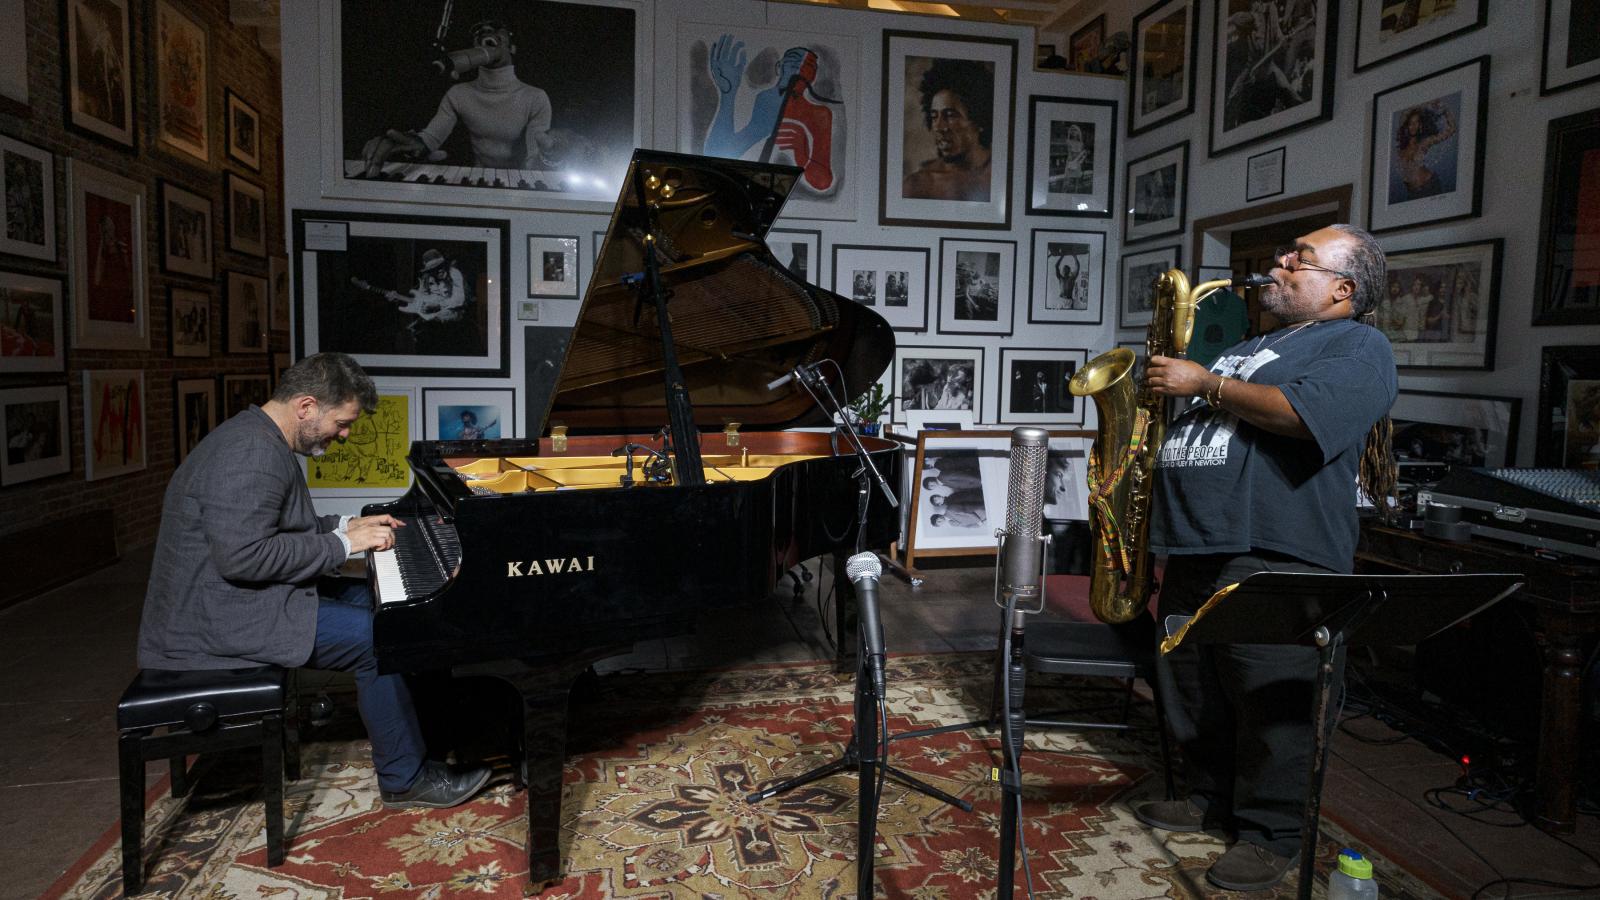 A man plays piano and another plays saxophone in a small art gallery